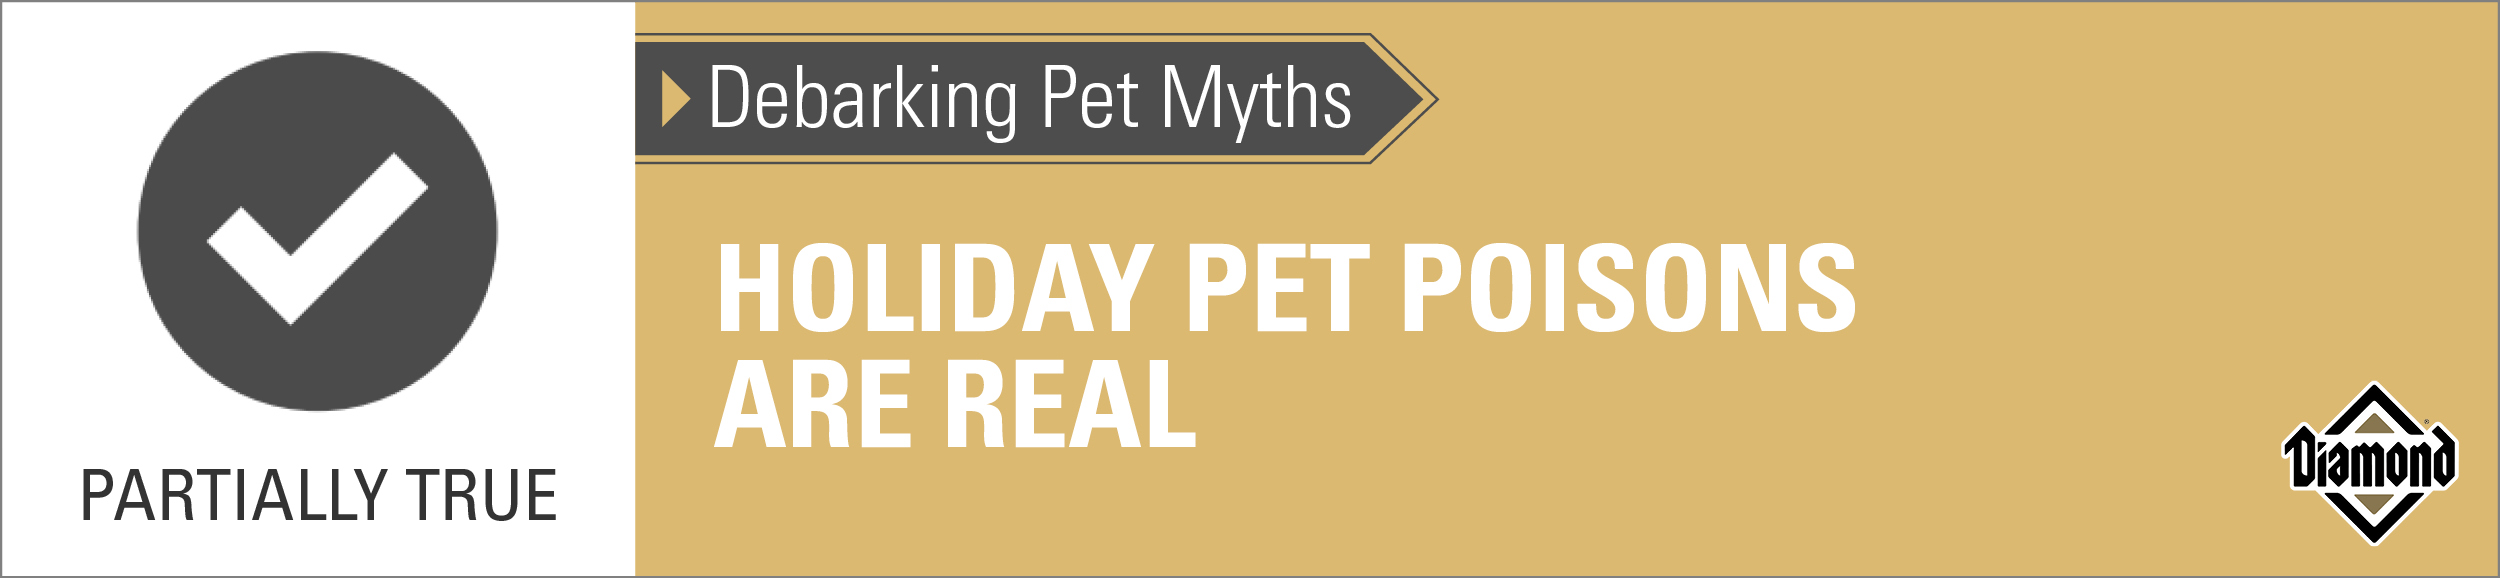 True: Pet Holiday Poisons Are Real | Diamond Pet Foods